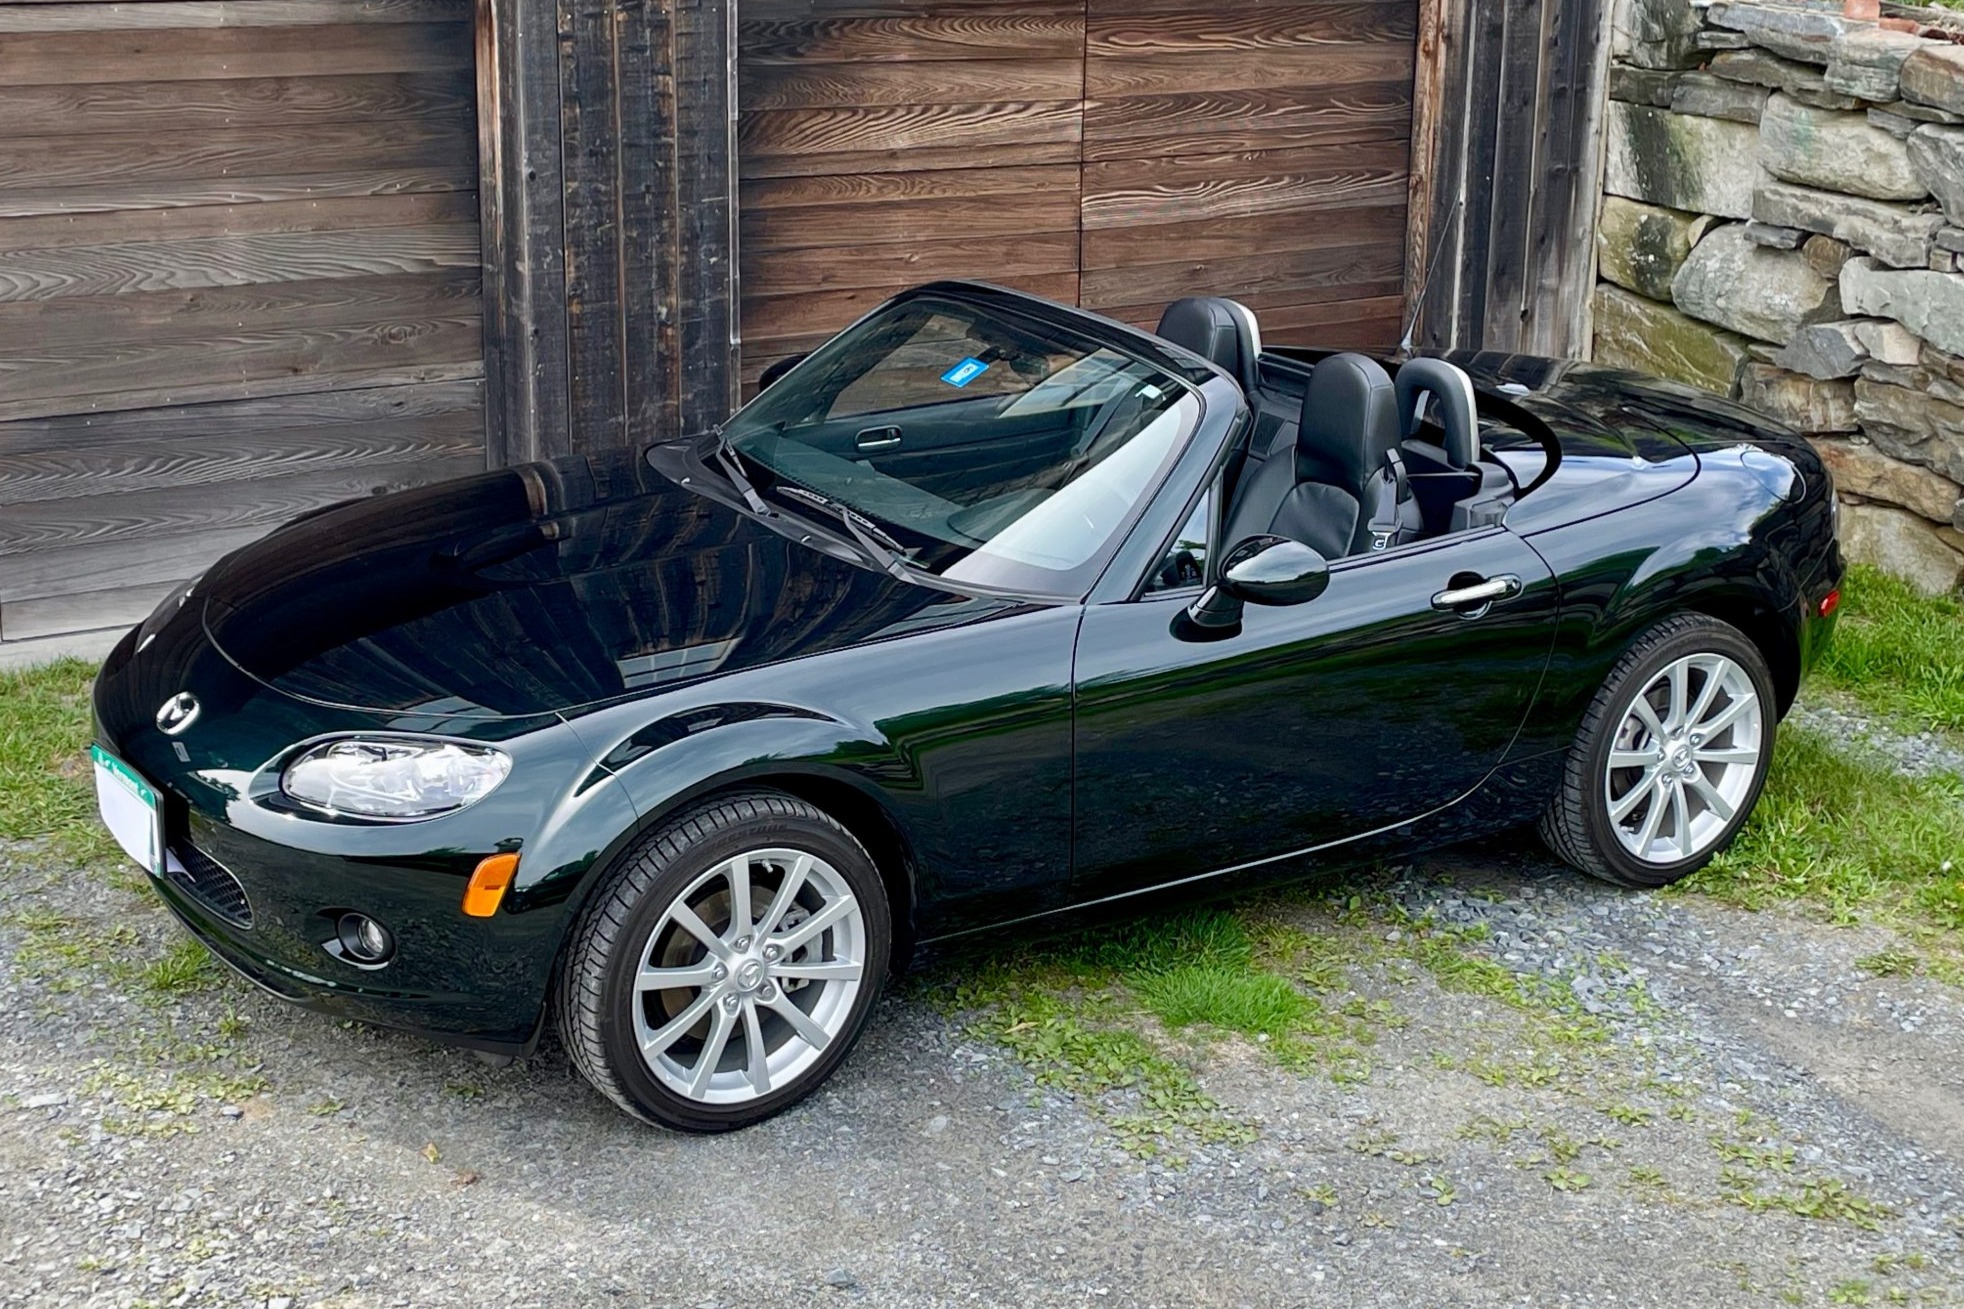 1k-Mile 2008 Mazda MX-5 Miata PRHT 6-Speed for sale on BaT Auctions - sold  for $26,250 on July 17, 2021 (Lot #51,392) | Bring a Trailer